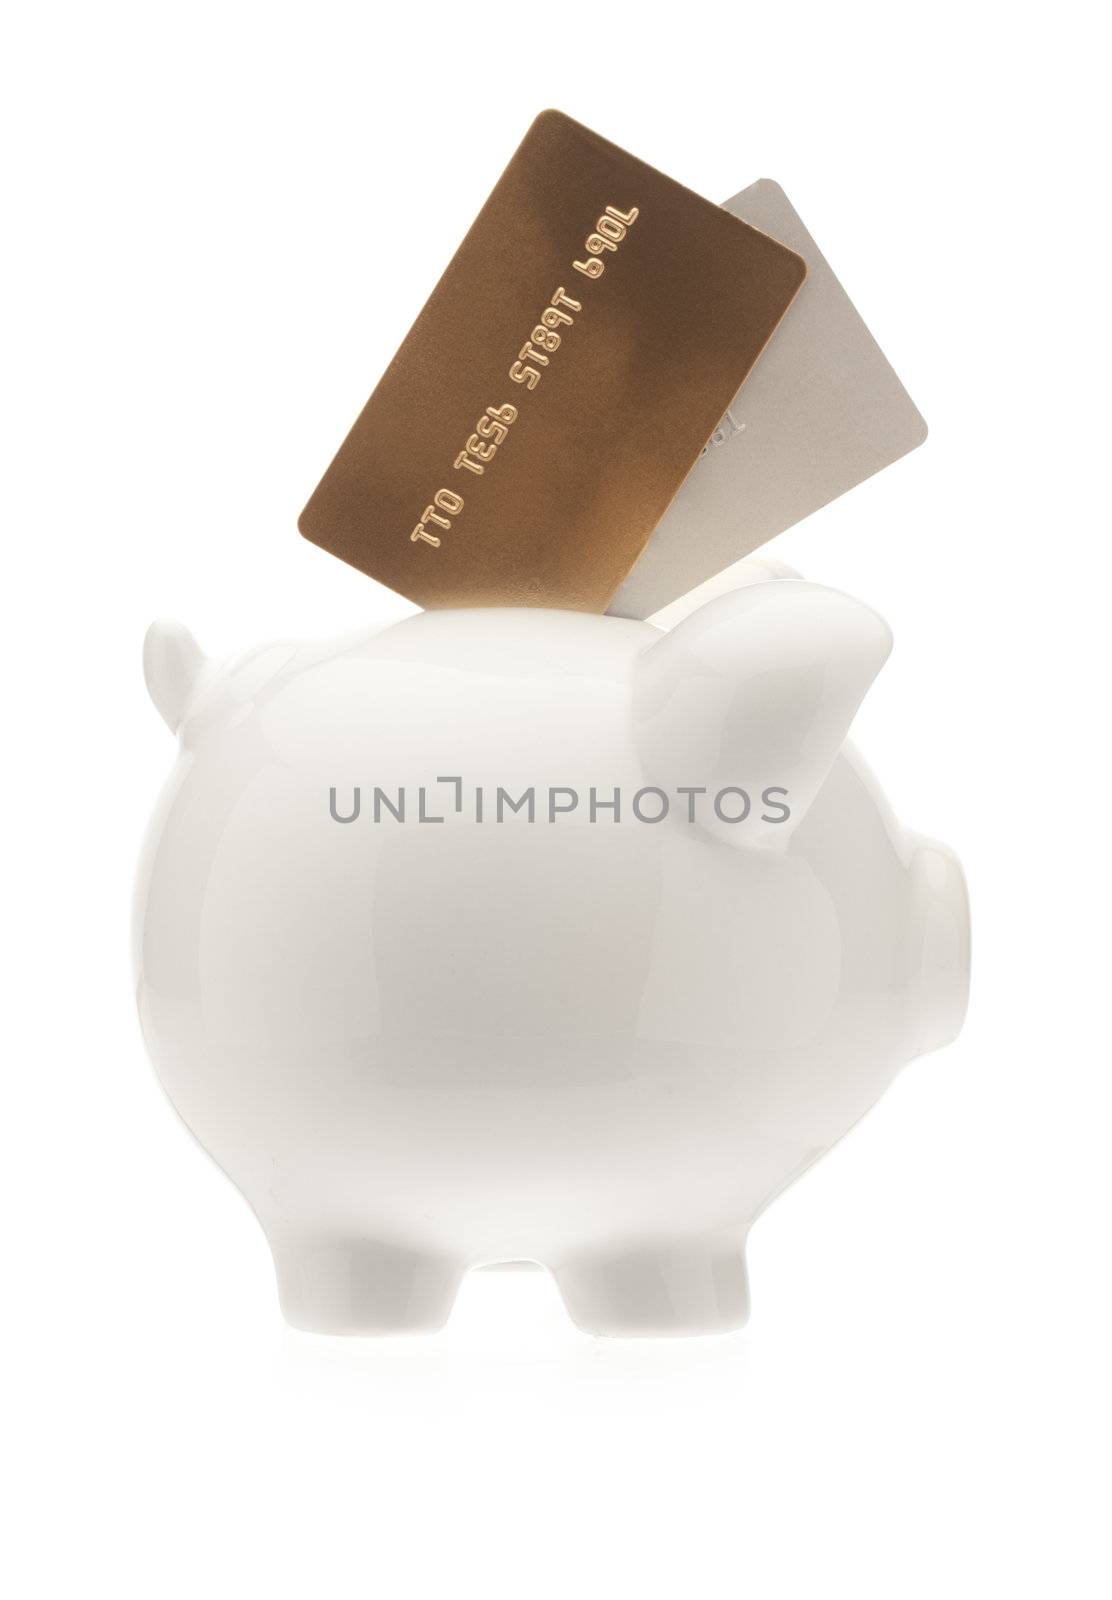 credit cards inserted to piggy bank by kozzi